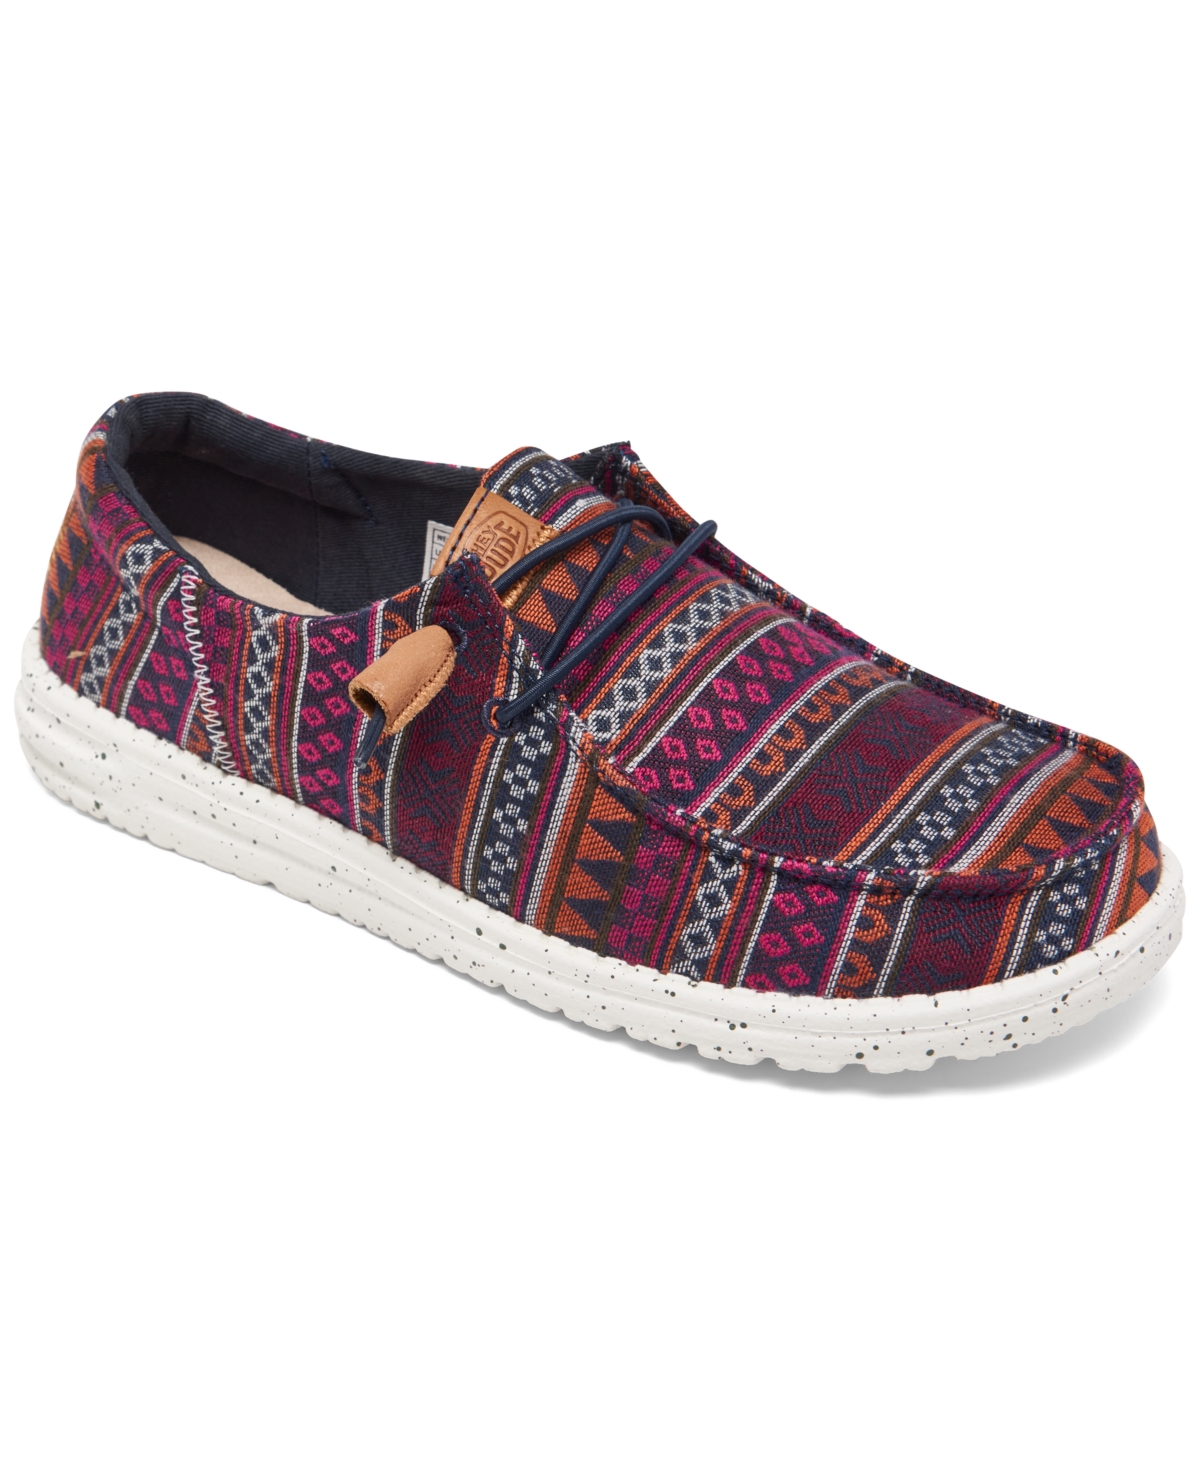 Women's Wendy Baja Slip-On Casual Moccasin Sneakers from Finish Line - Baja Allover Print